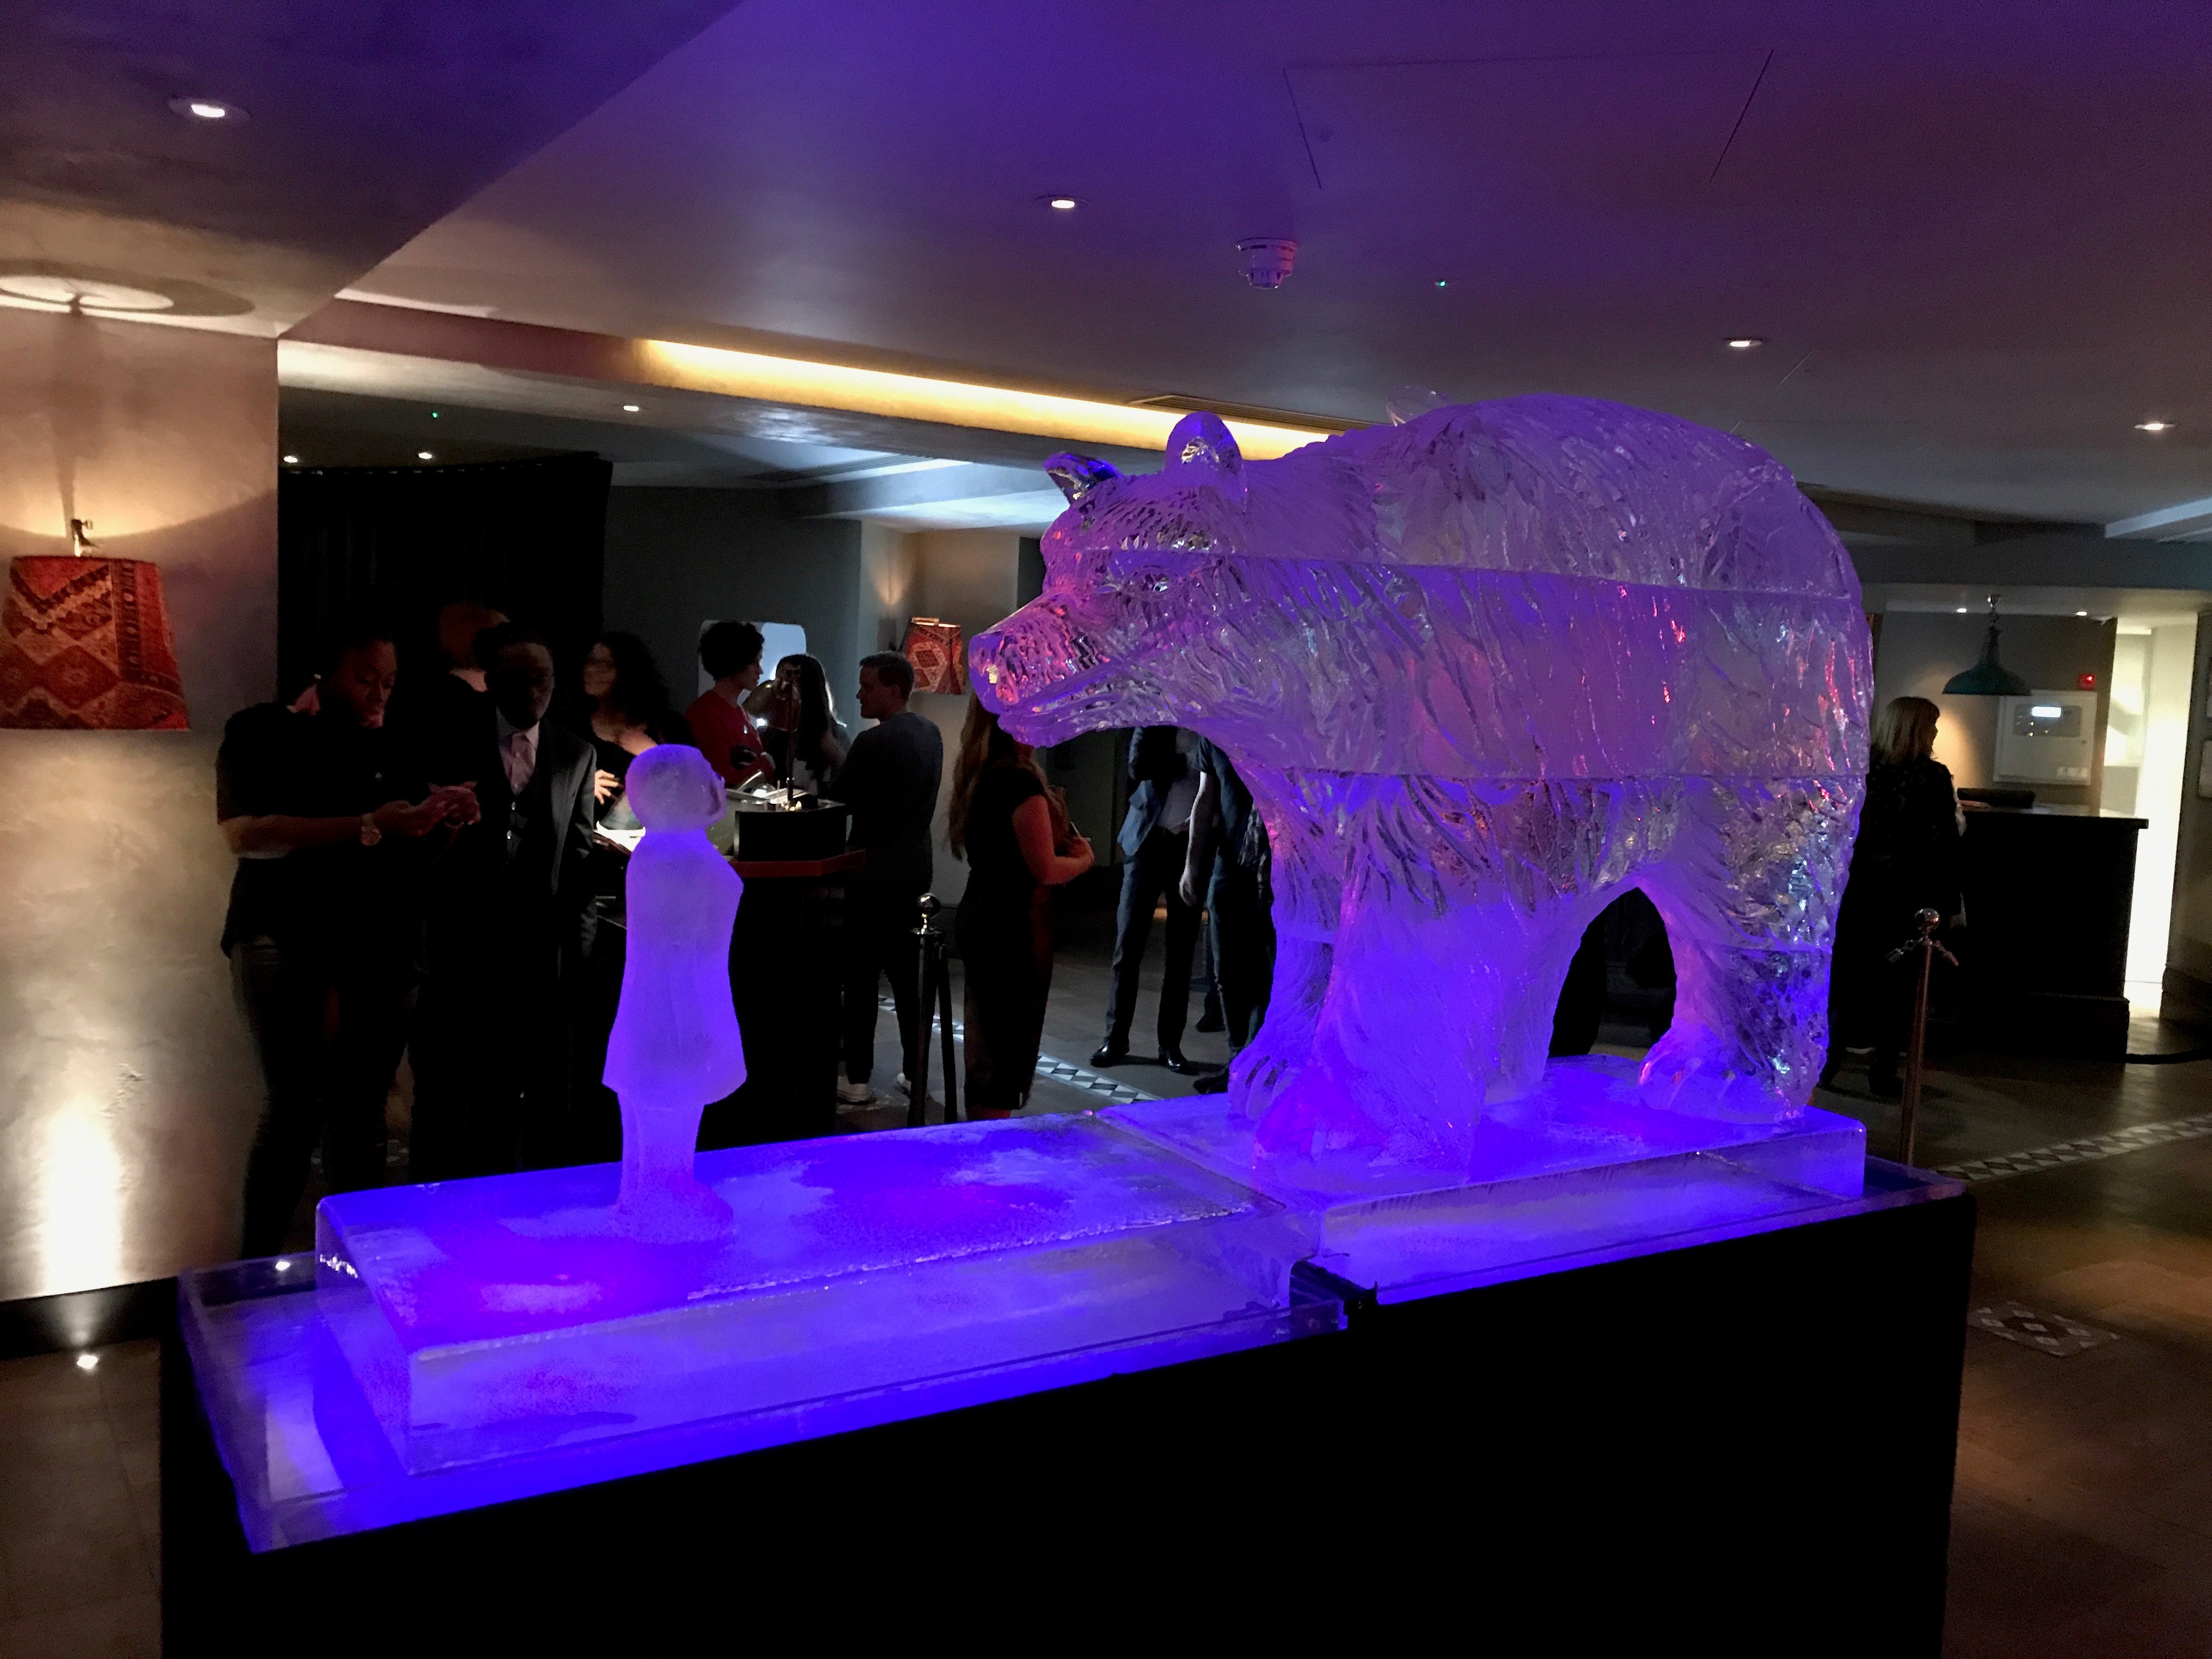 Bear and Girl ice sculpture